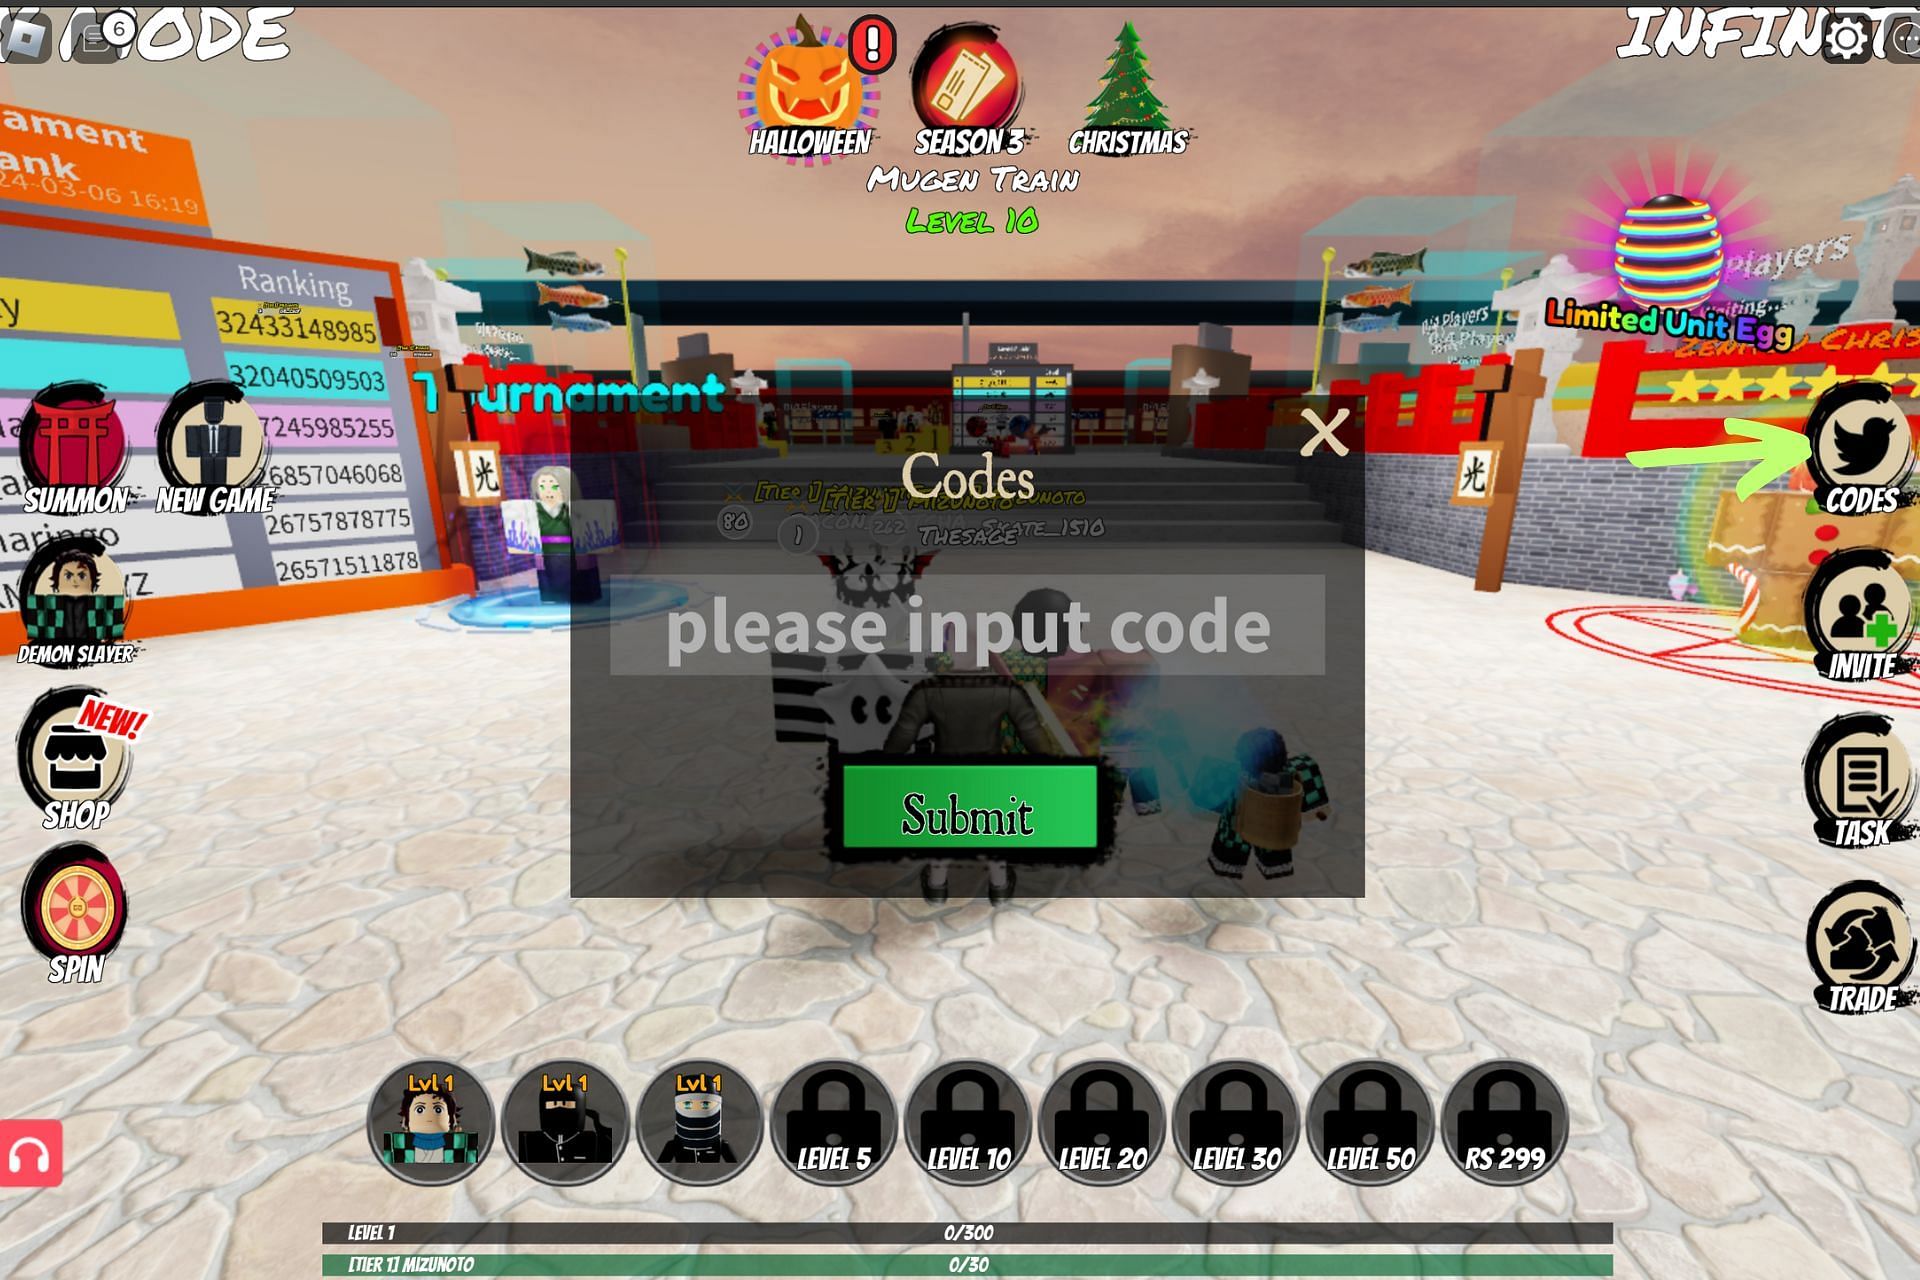 Codes tab in the game (Image via Roblox)